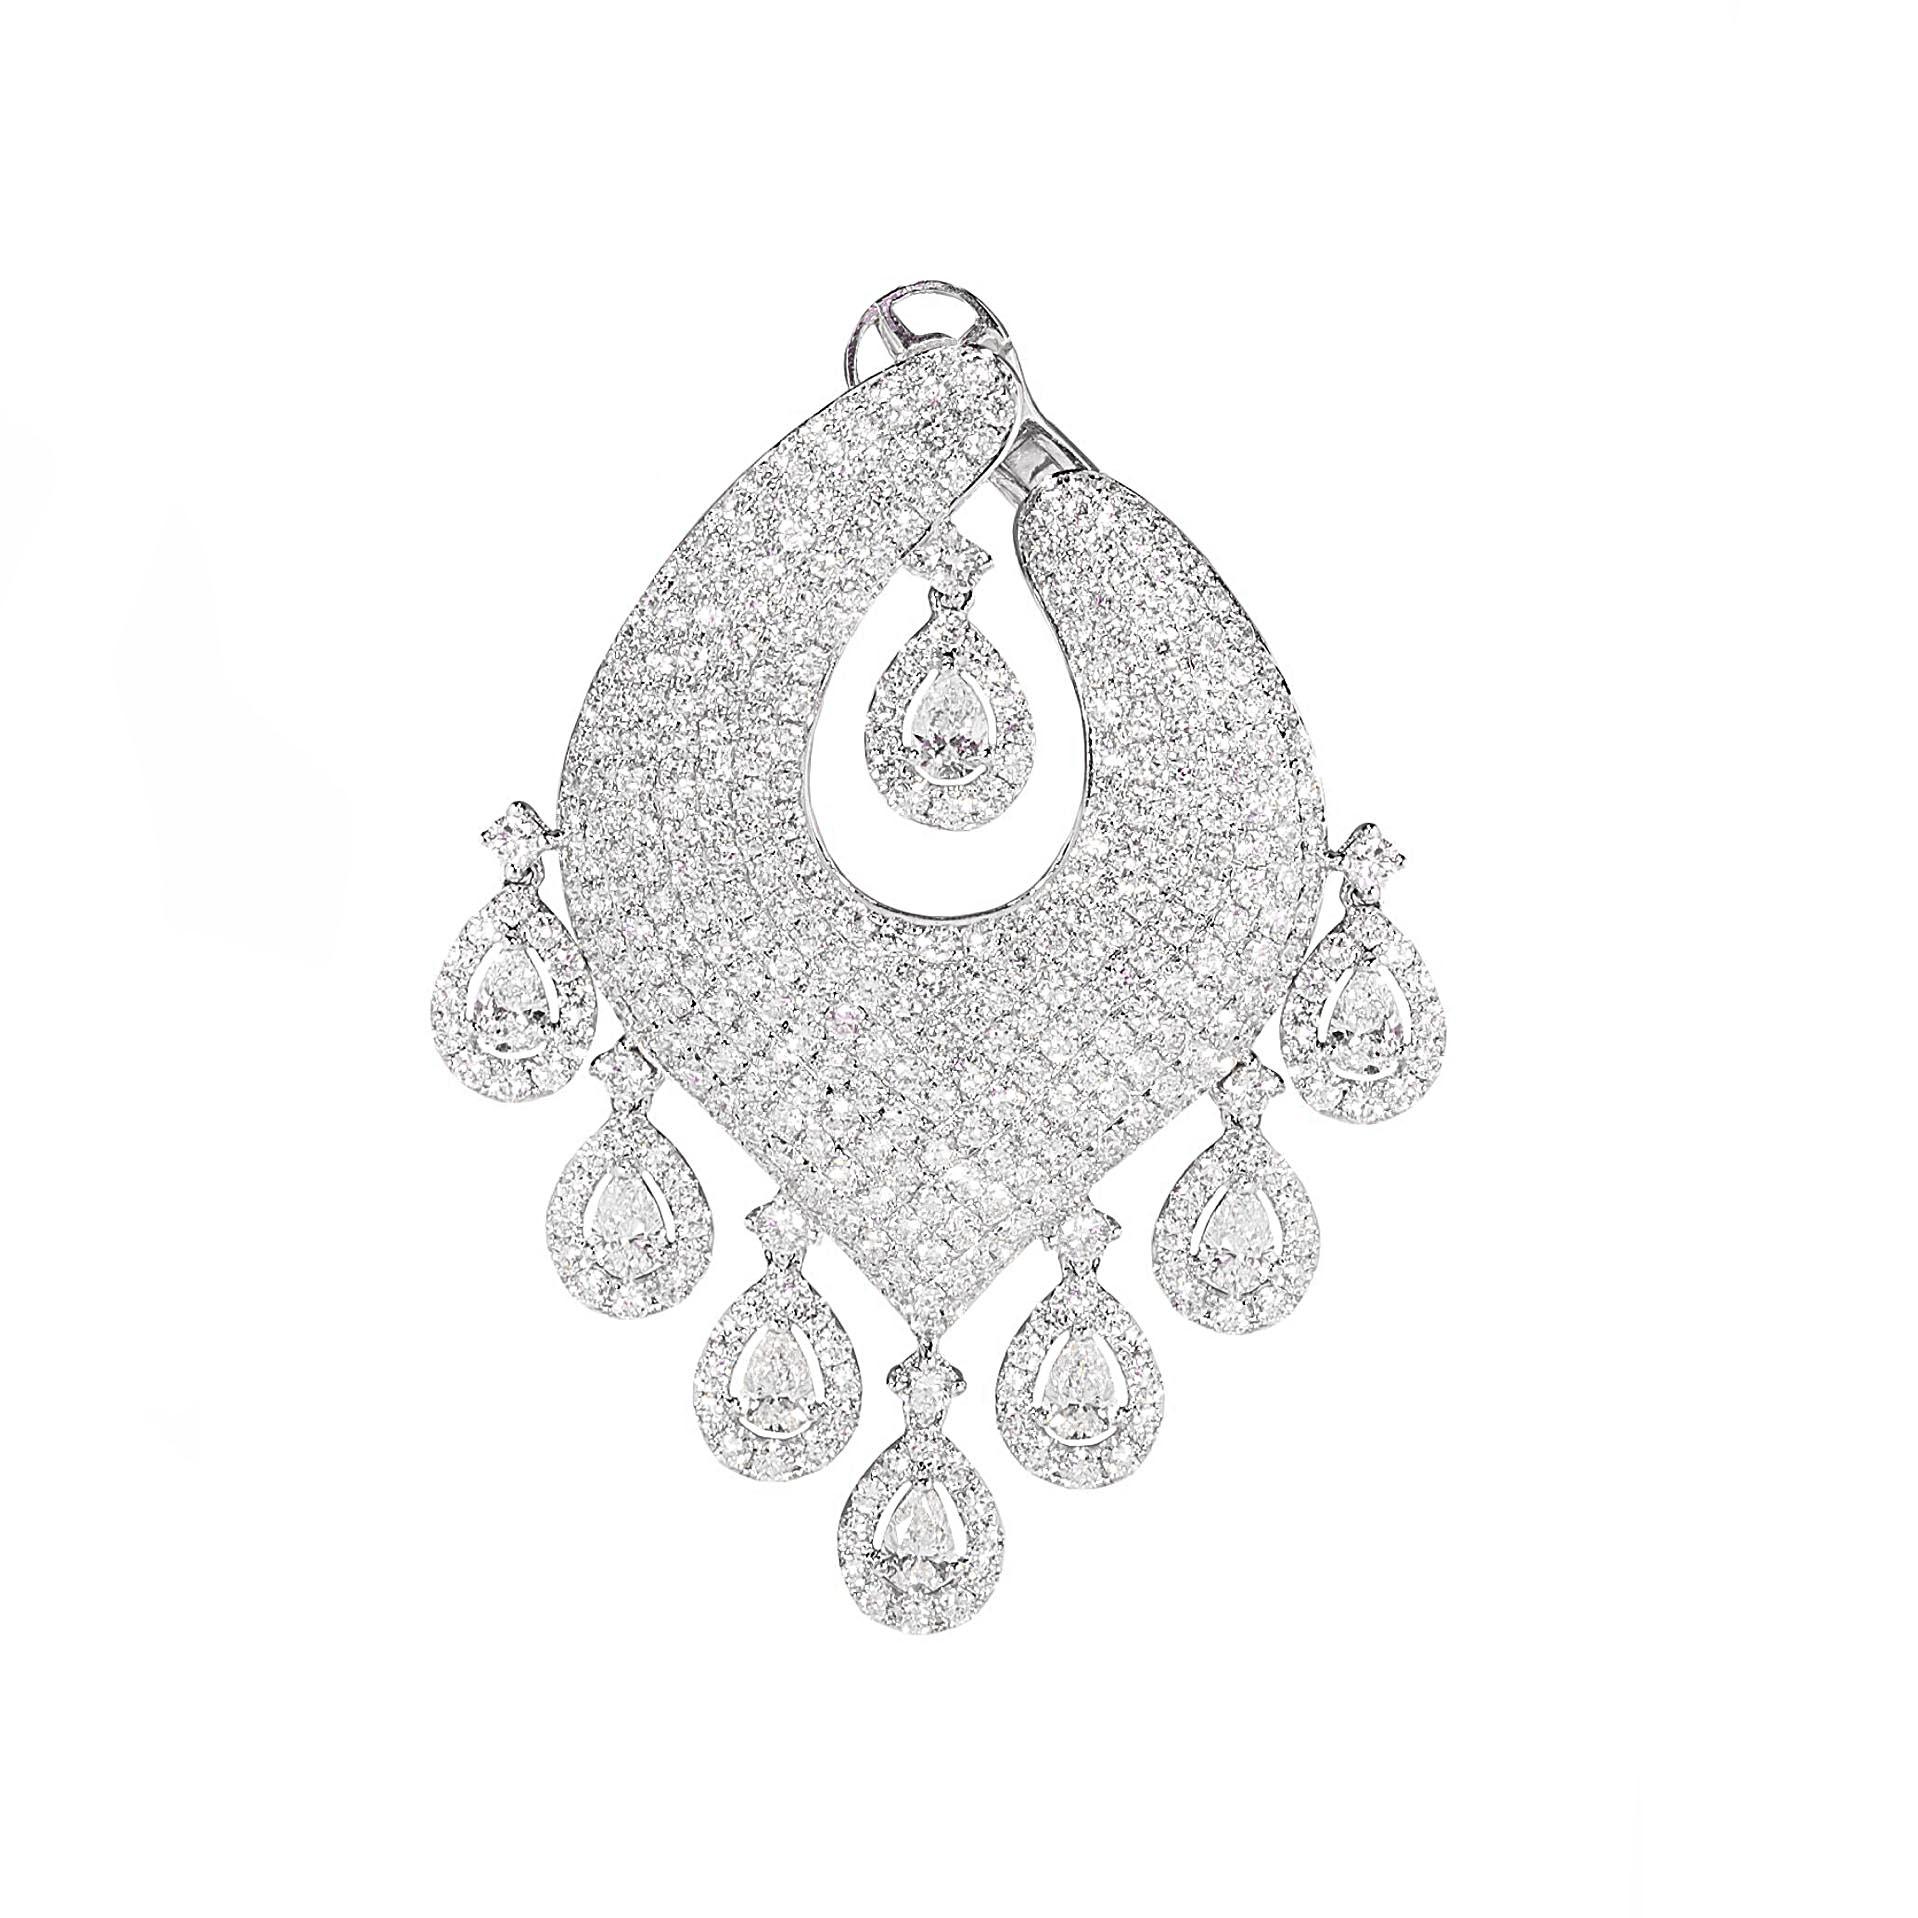 Beautiful chandelier and dangle earrings are made in 18 karat white gold. The movement on them is unbelievable. The pear shape diamonds dangle from the earring and have micro pave surrounding each stone. There are 16 white pear shape diamonds